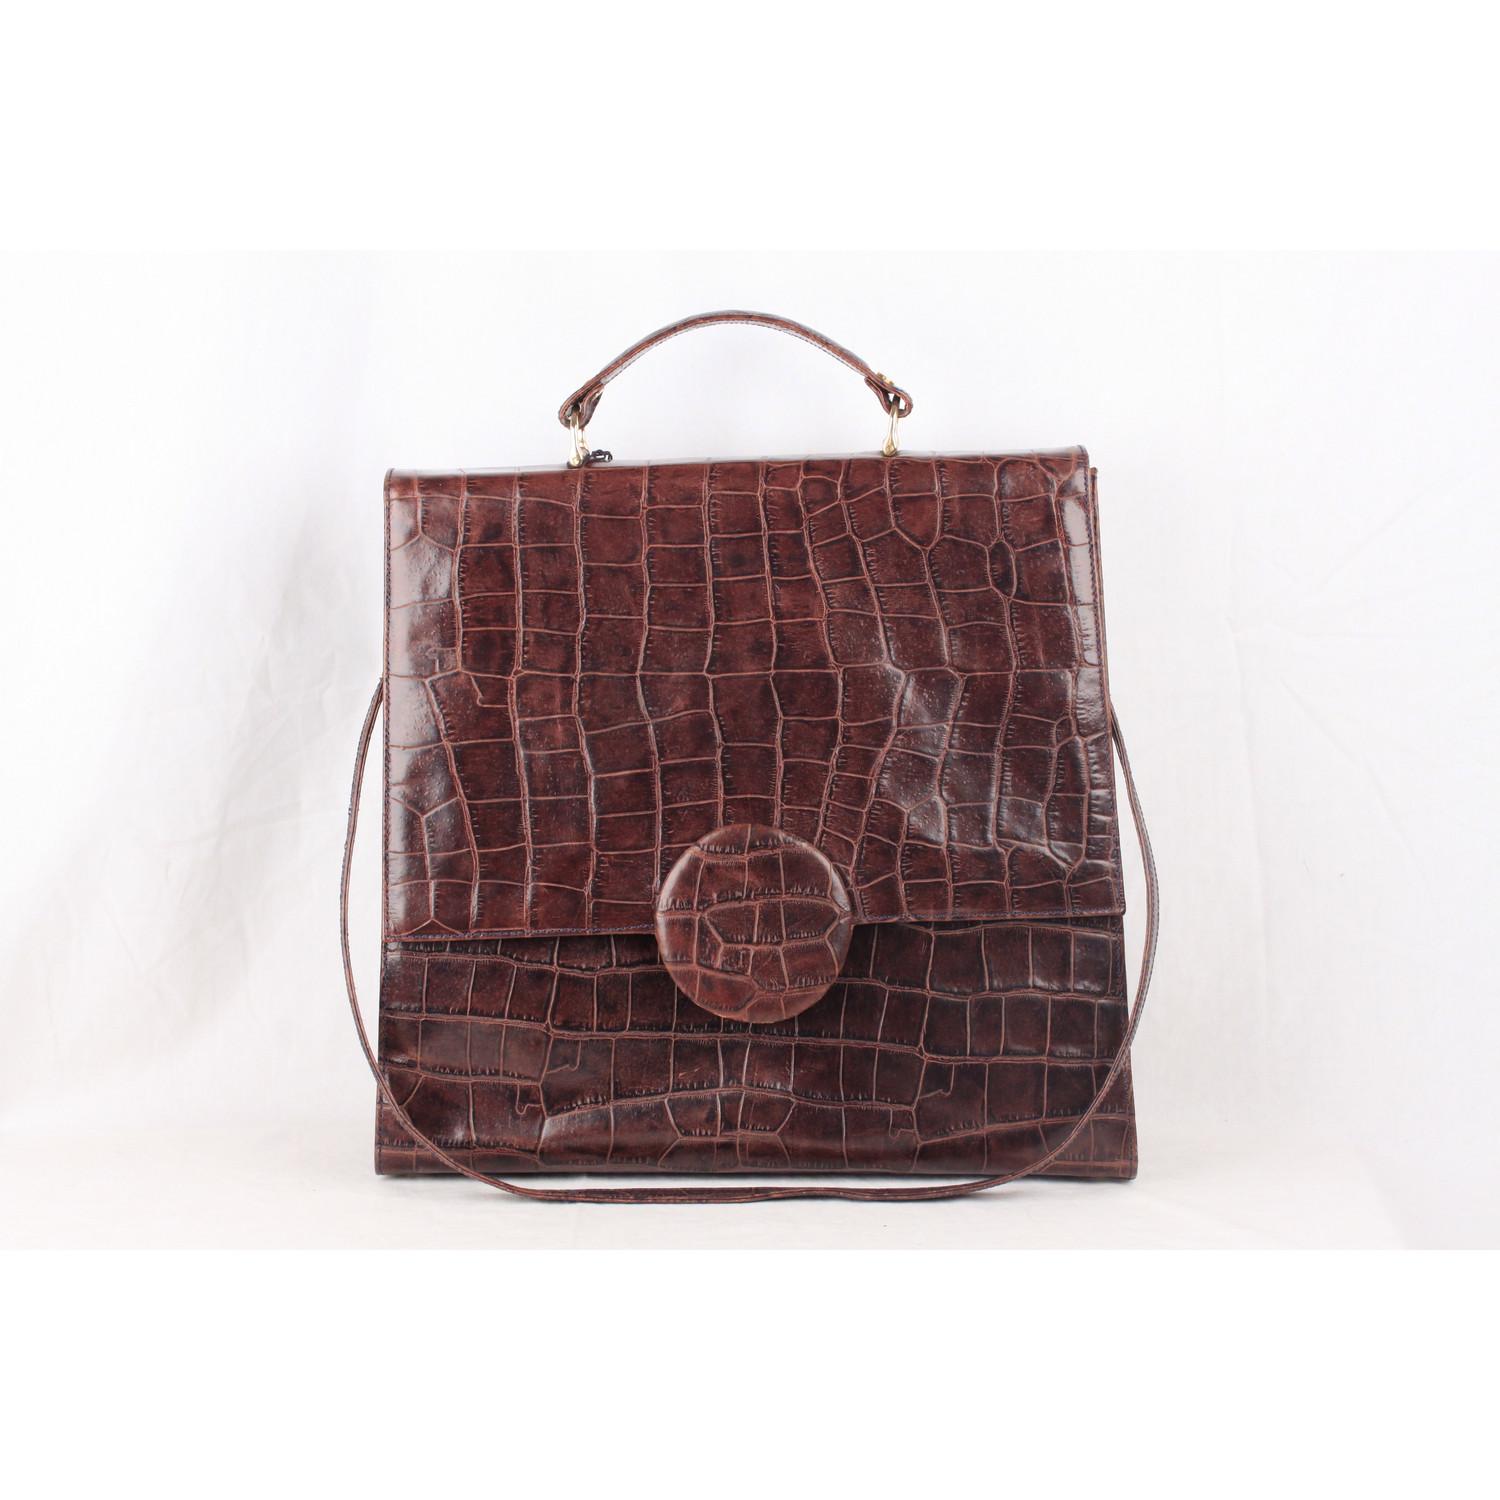 - 'ROY LA - Vera Pelle' tag inside 
- Brown Embossed leather with crocodile look
- Flap with clasp closure 
- 5 bottom feet
- Top carry handle
- Removable shoulder strap
- Suede lining
- 1 side zip pocket inside